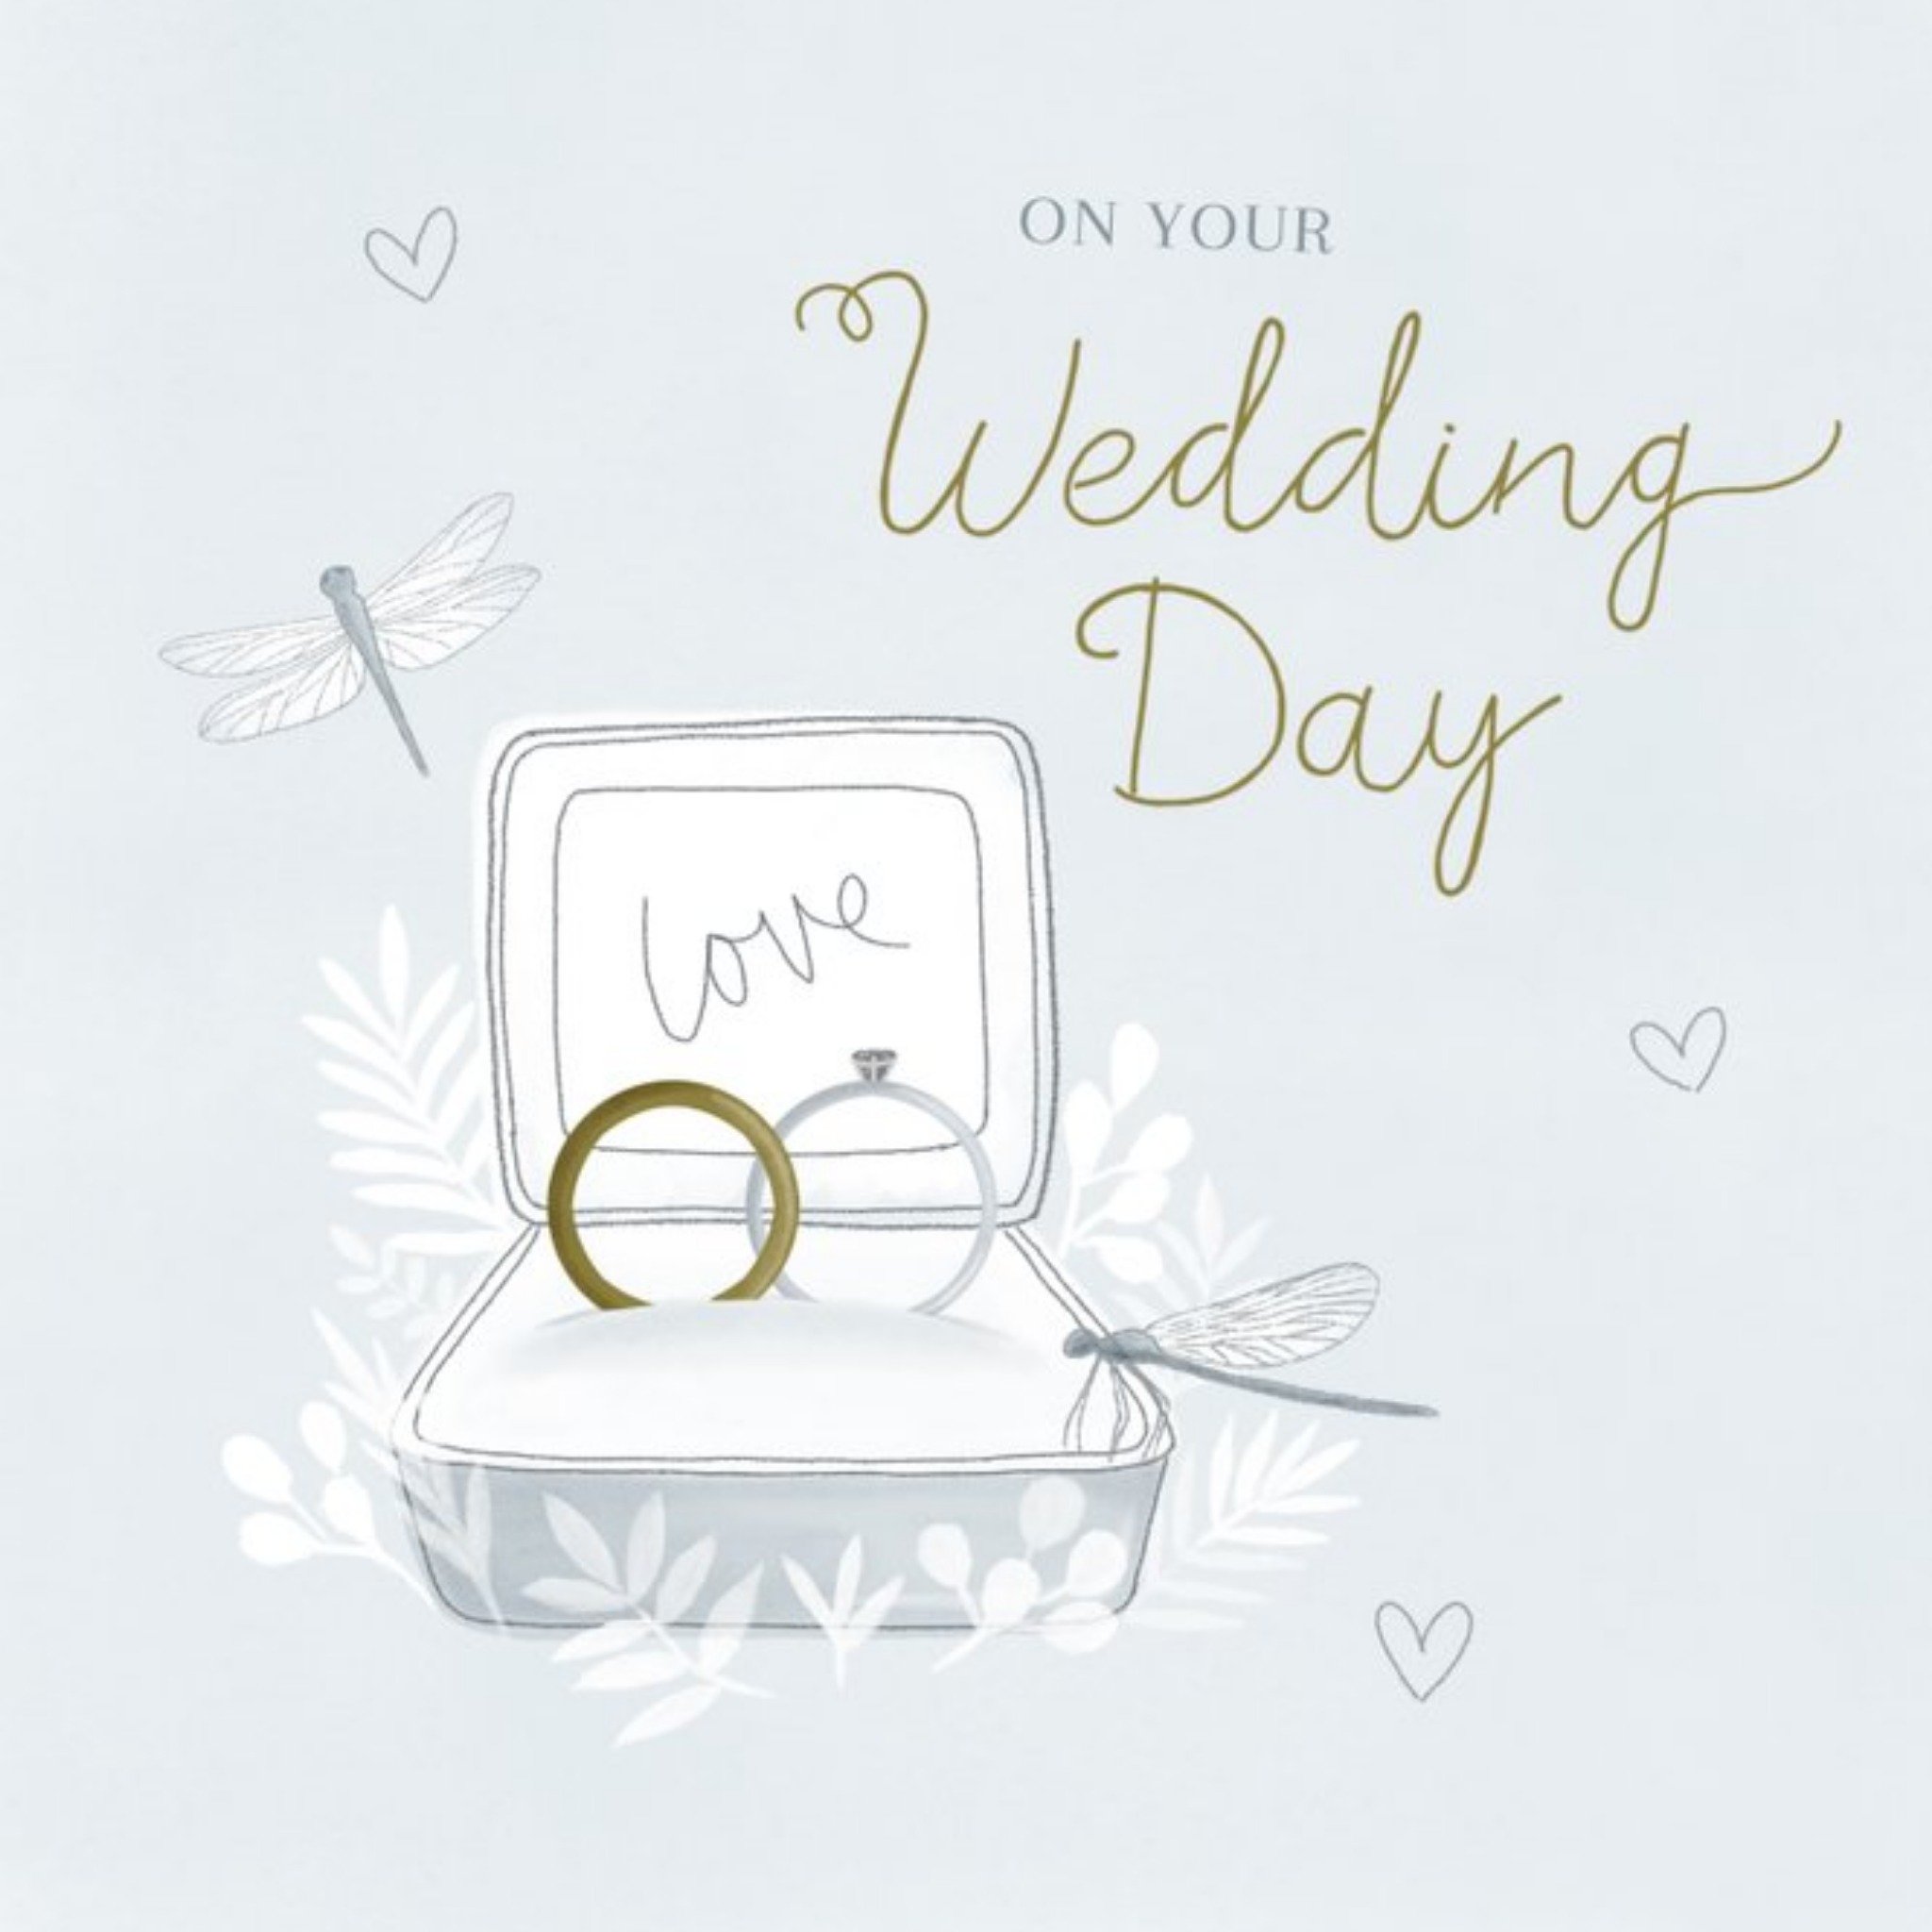 Moonpig Illustration Of Wedding Rings In A Ring Box Surrounded By Hearts And Dragonflies Wedding Day